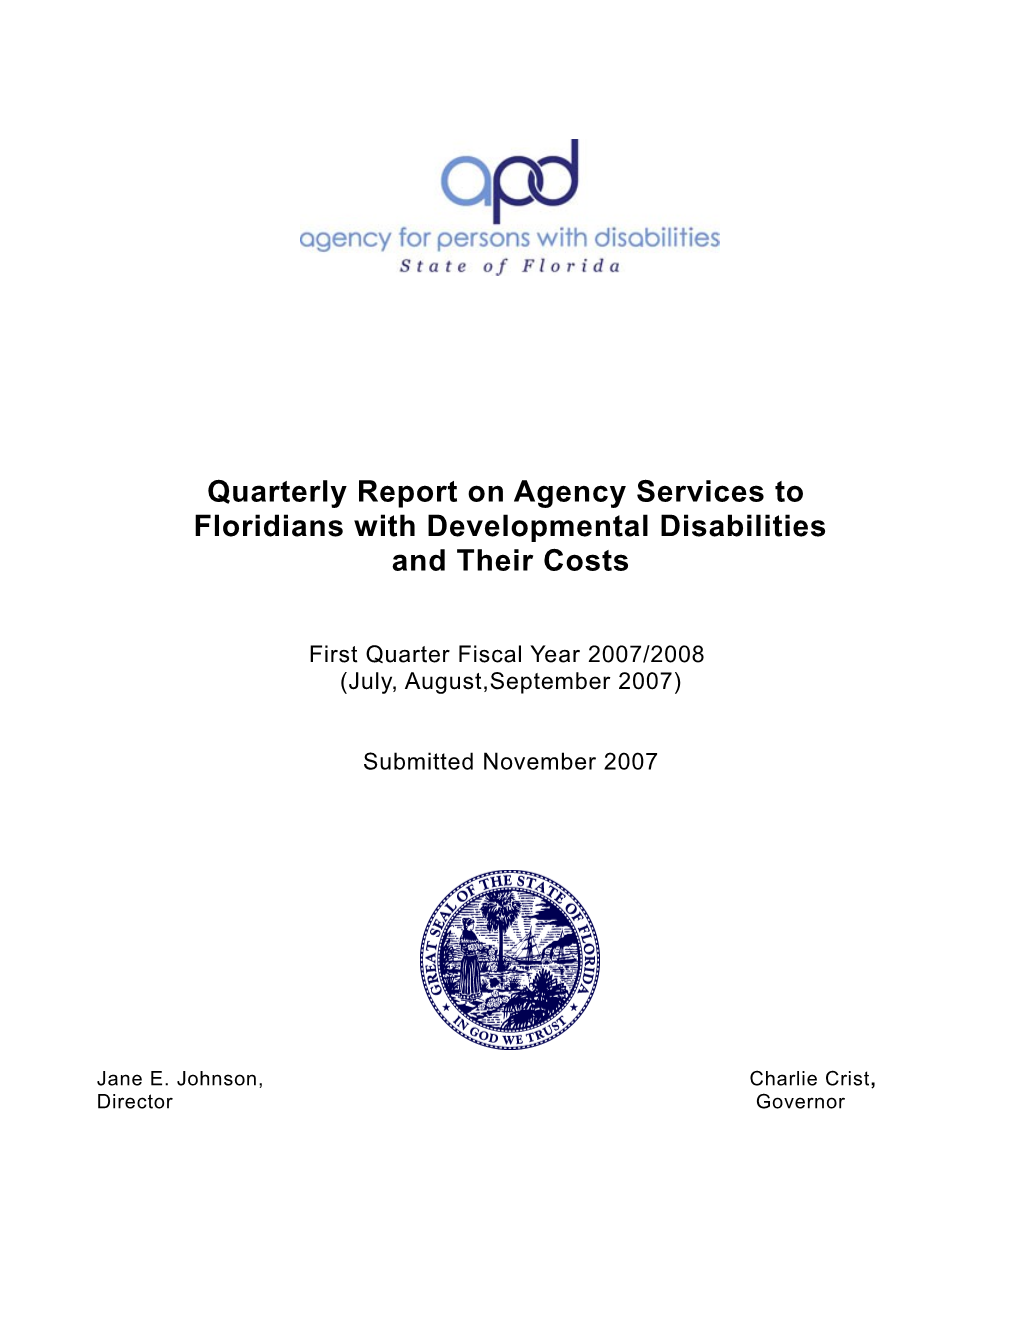 Quarterly Report - First Quarter Fiscal Year 2007/2008